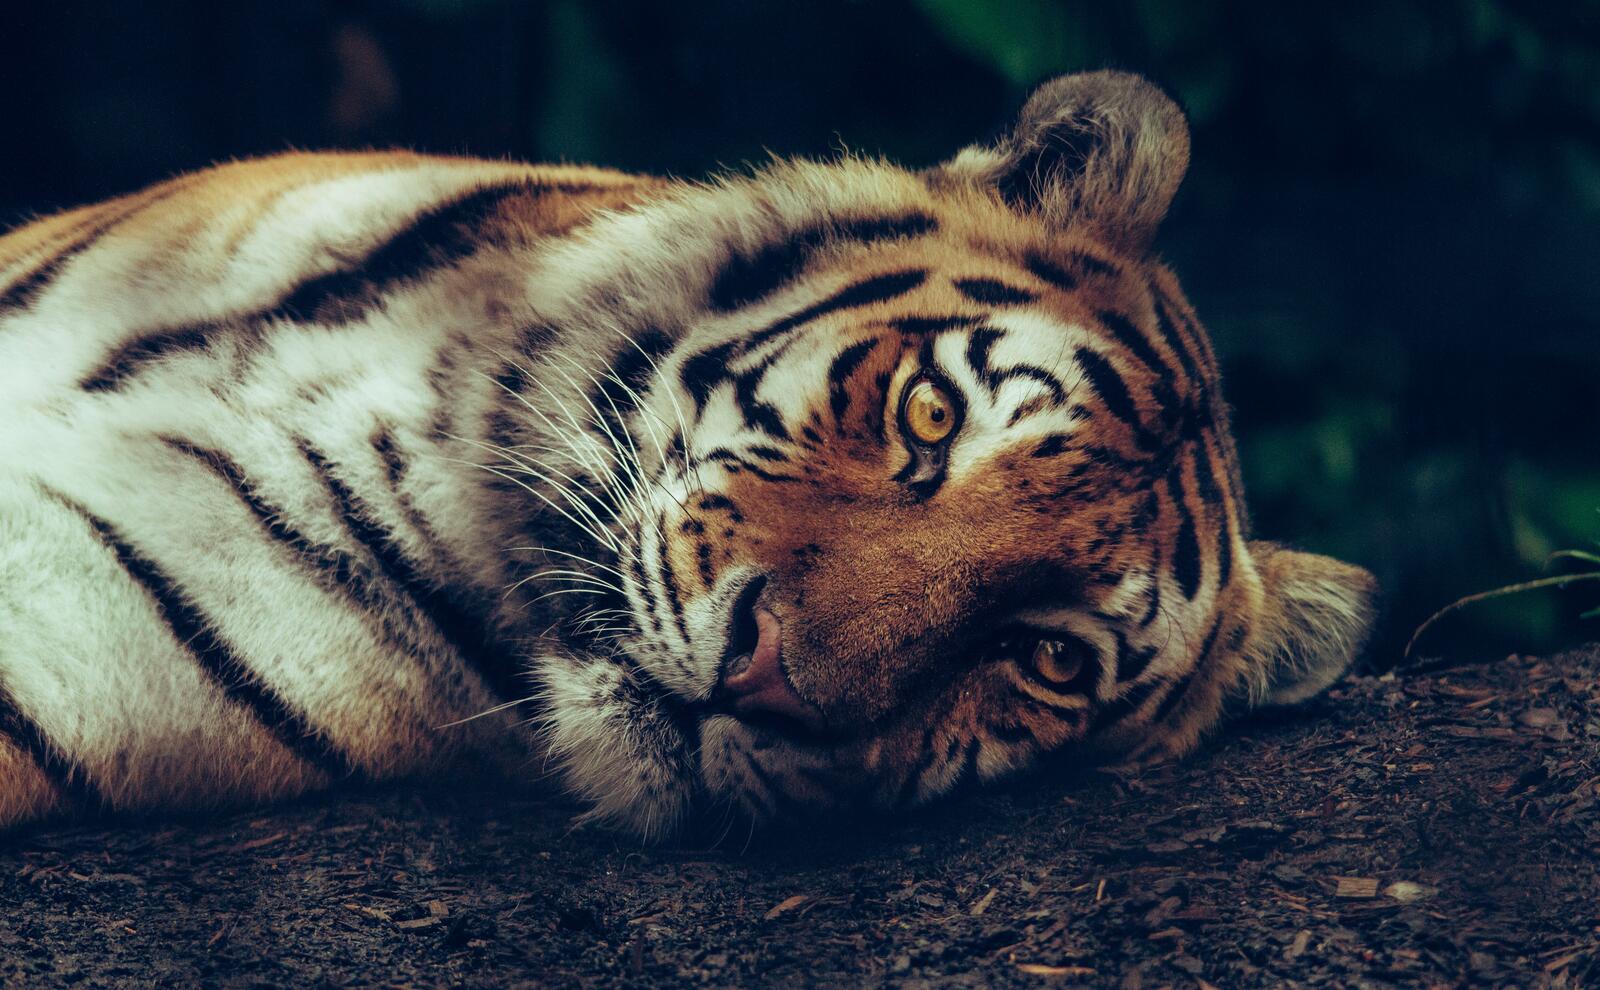 Free photo The tiger lies with his eyes open